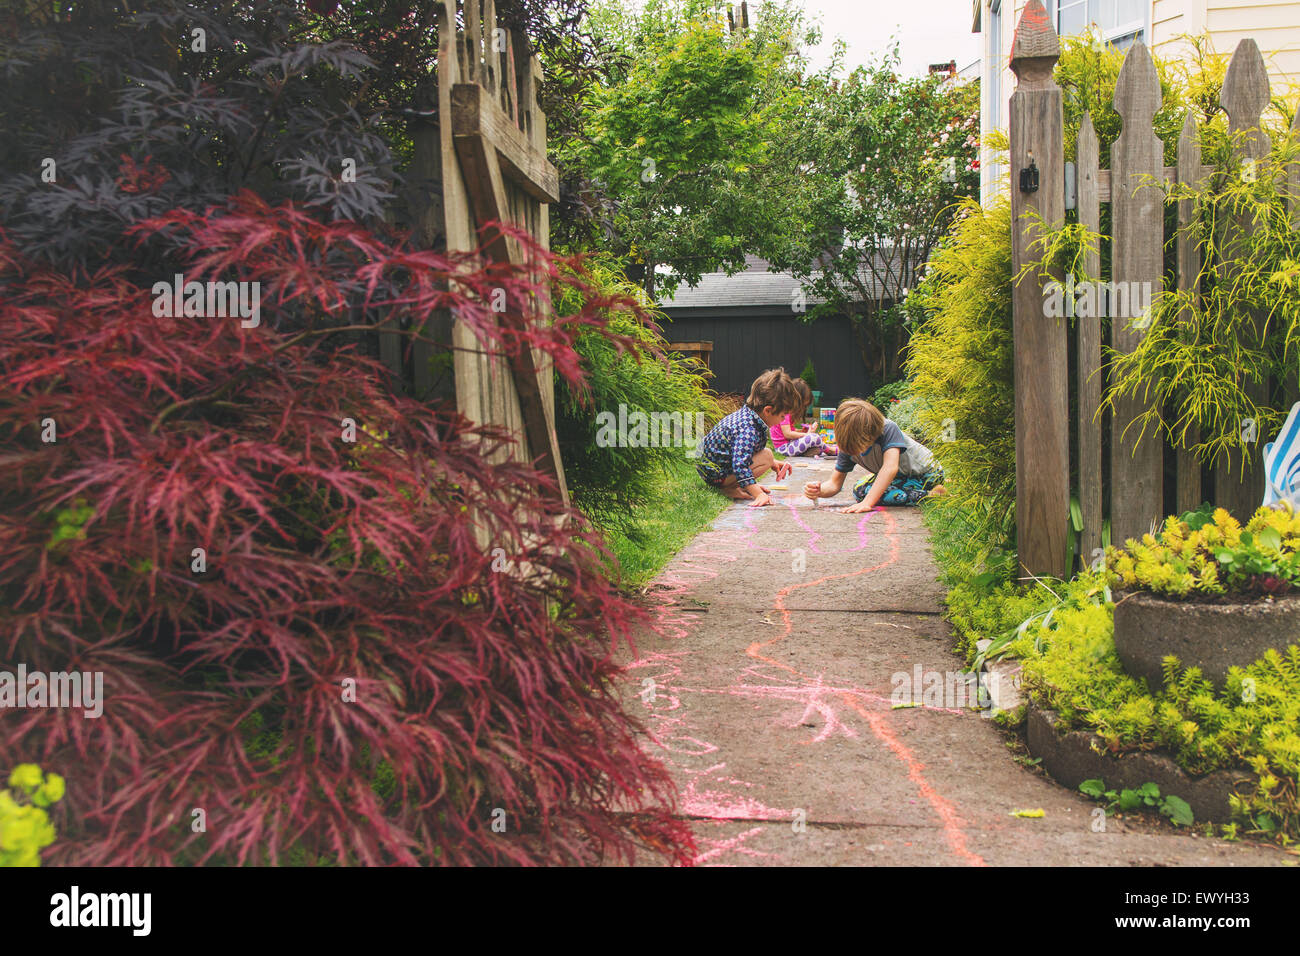 Three young children drawing with chalk on a path in a garden Stock Photo